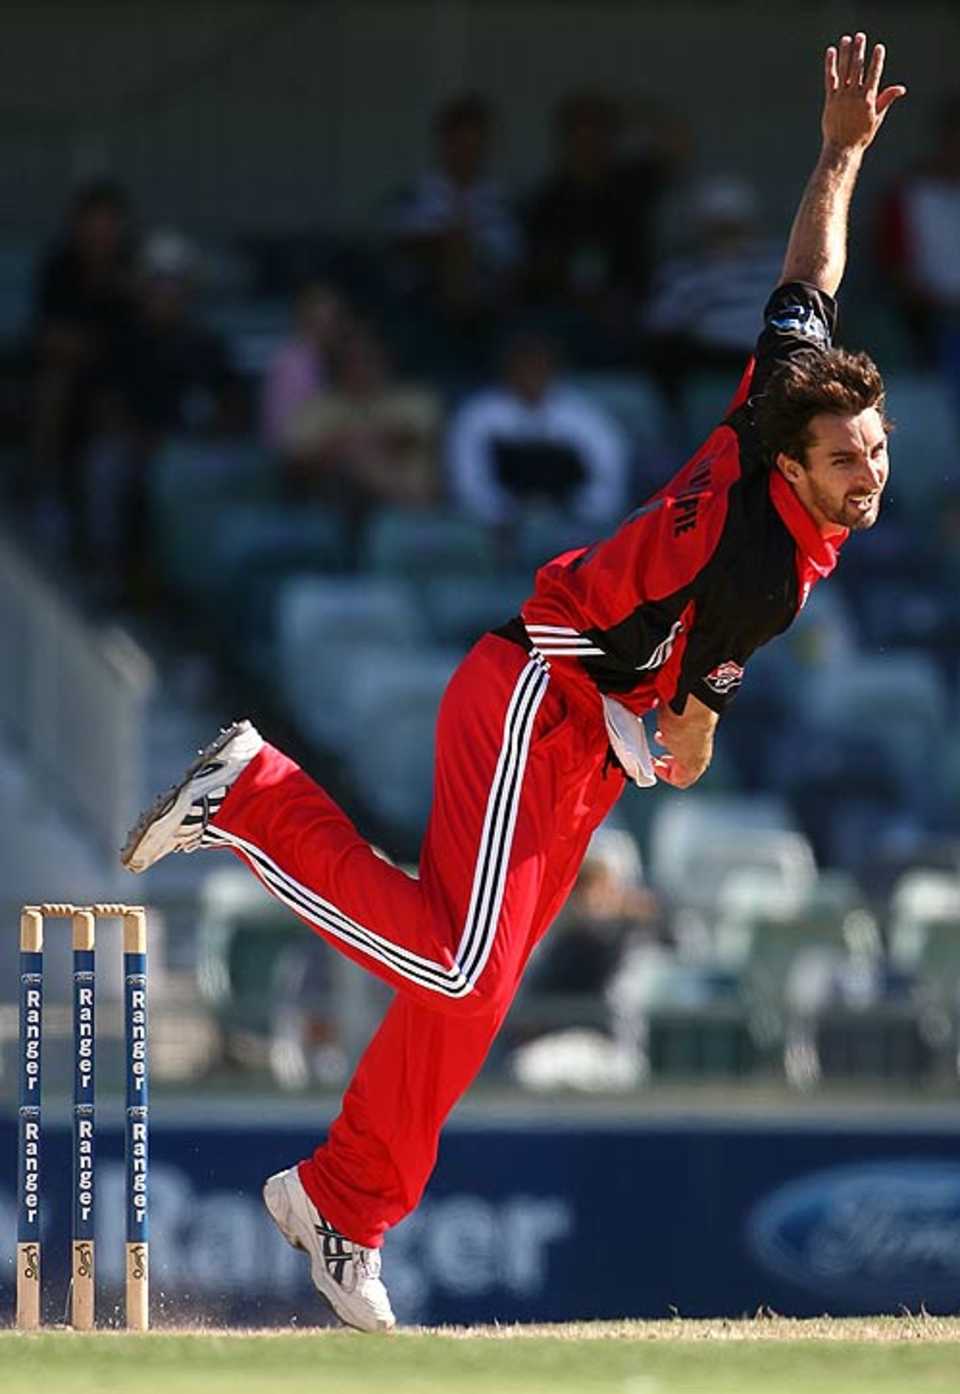 Jason Gillespie bowls during the Redbacks' limited-overs loss, Western Australia v South Australia, FR Cup, Perth, January 17, 2007